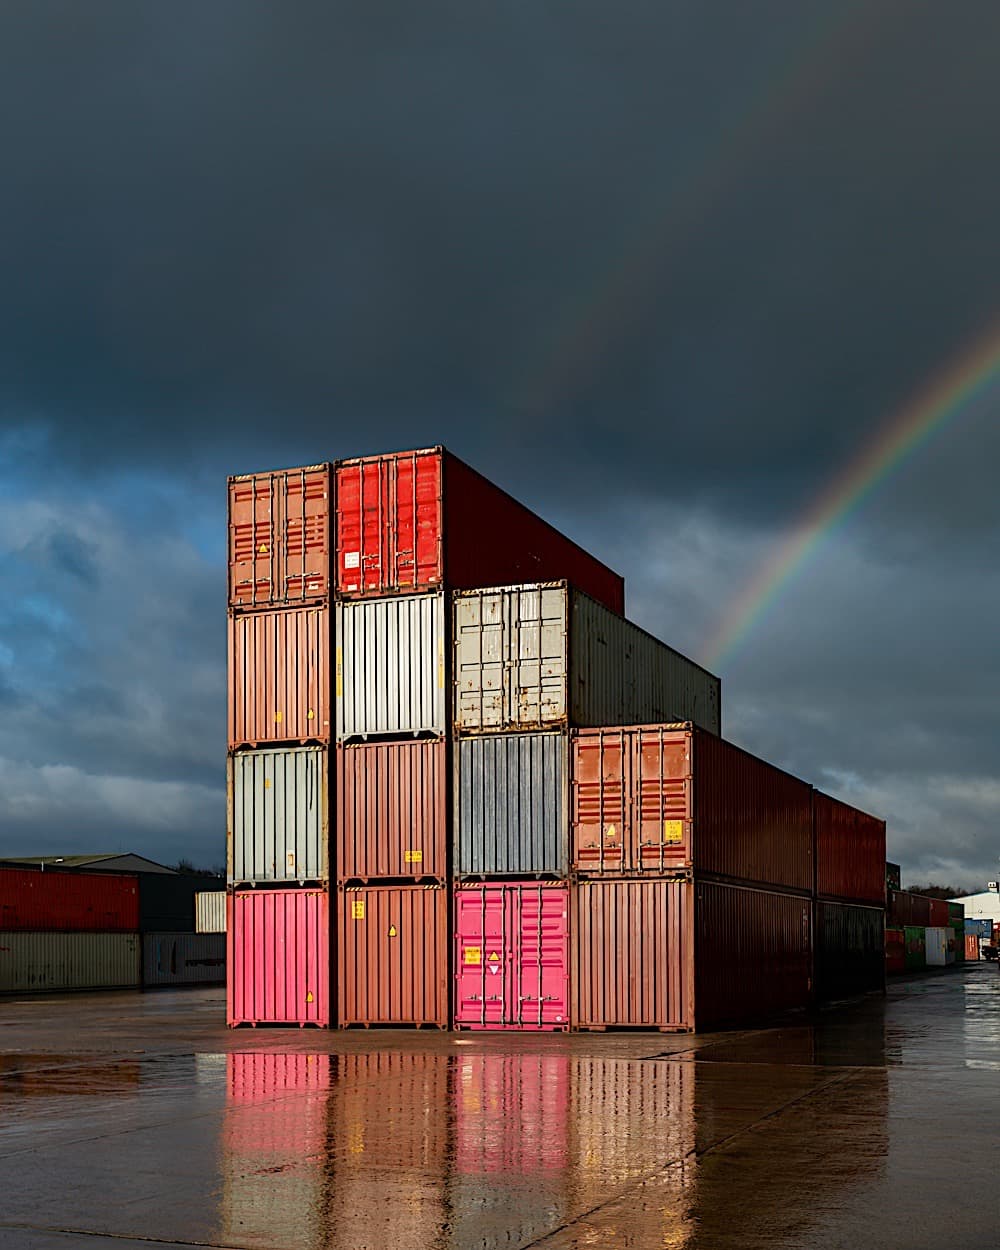 https://quvisolar.com/wp-content/uploads/2023/09/a-stack-of-shipping-containers-on-a-deserted-dock-2023-04-01-00-07-10-utc.jpg